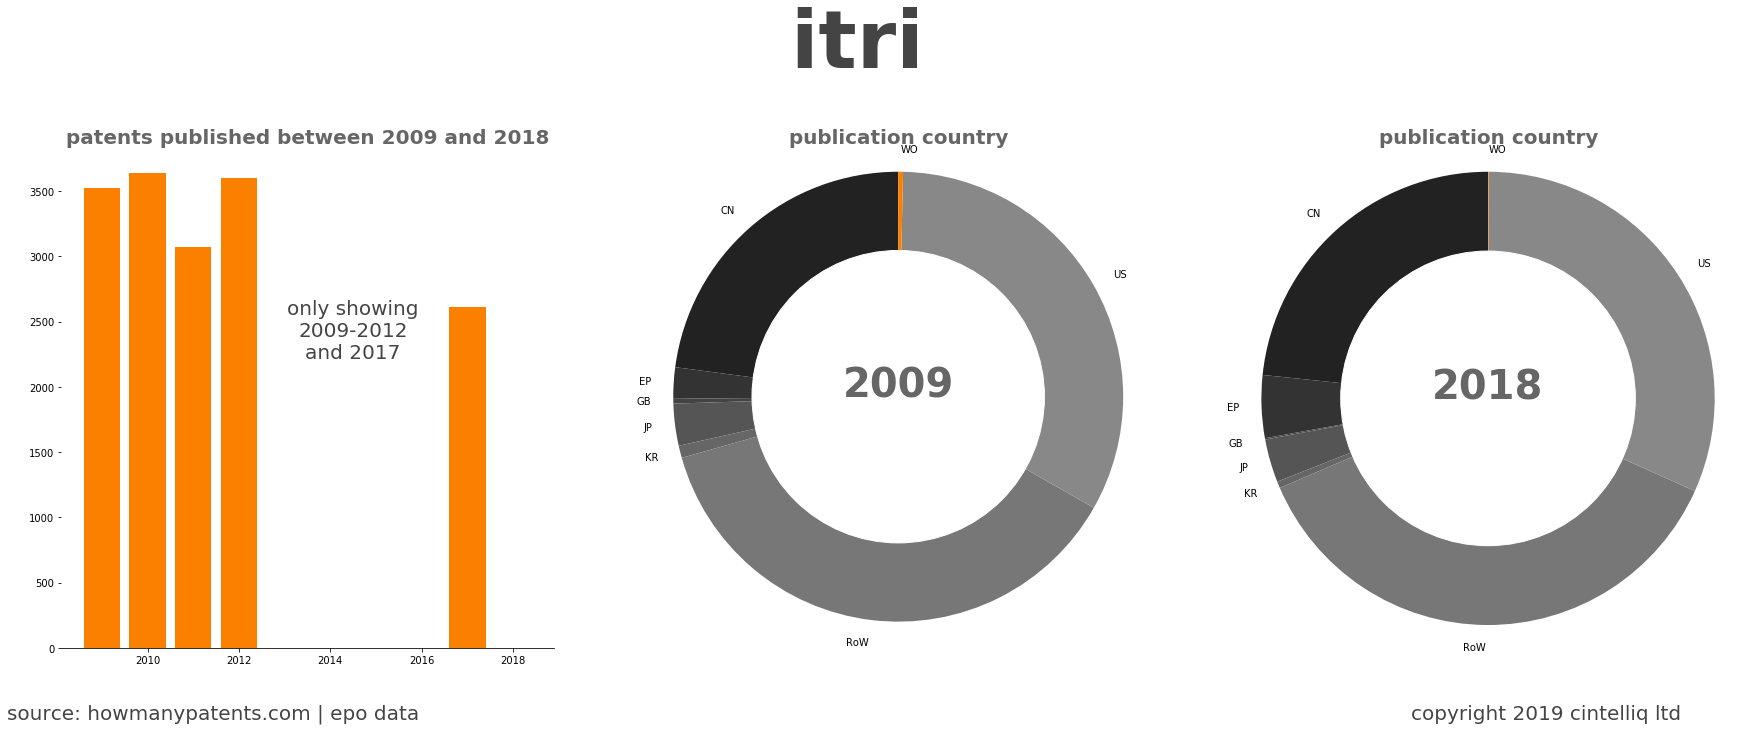 summary of patents for Itri 